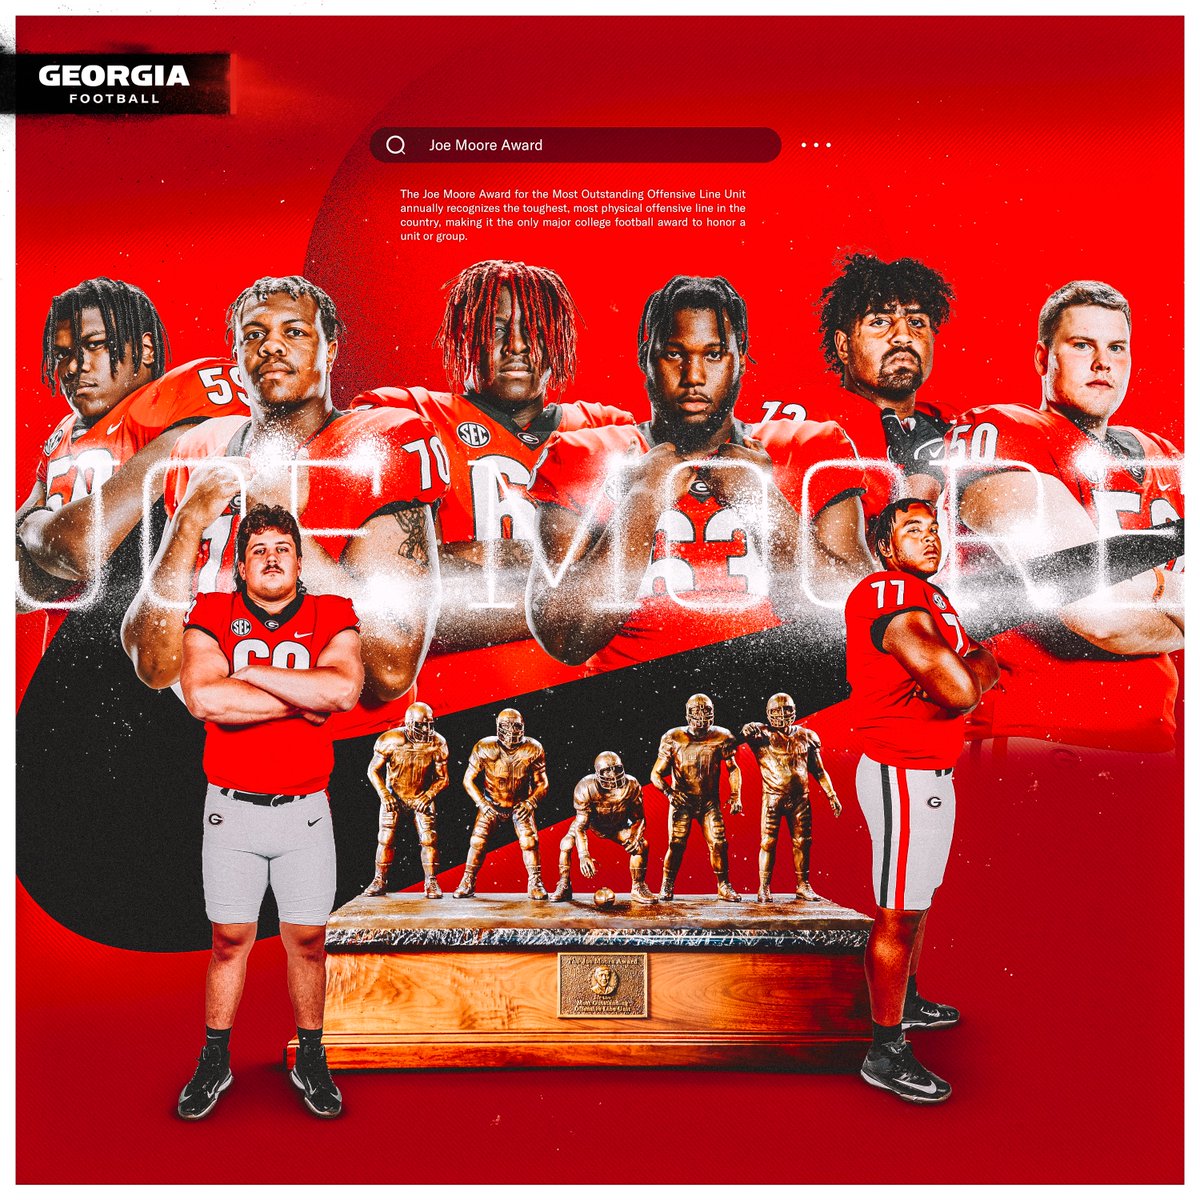 The Georgia O-Line is one of 22 teams named to the Joe Moore Award Midseason Honor Roll, recognizing the nation's most outstanding offensive line unit. #GoDawgs